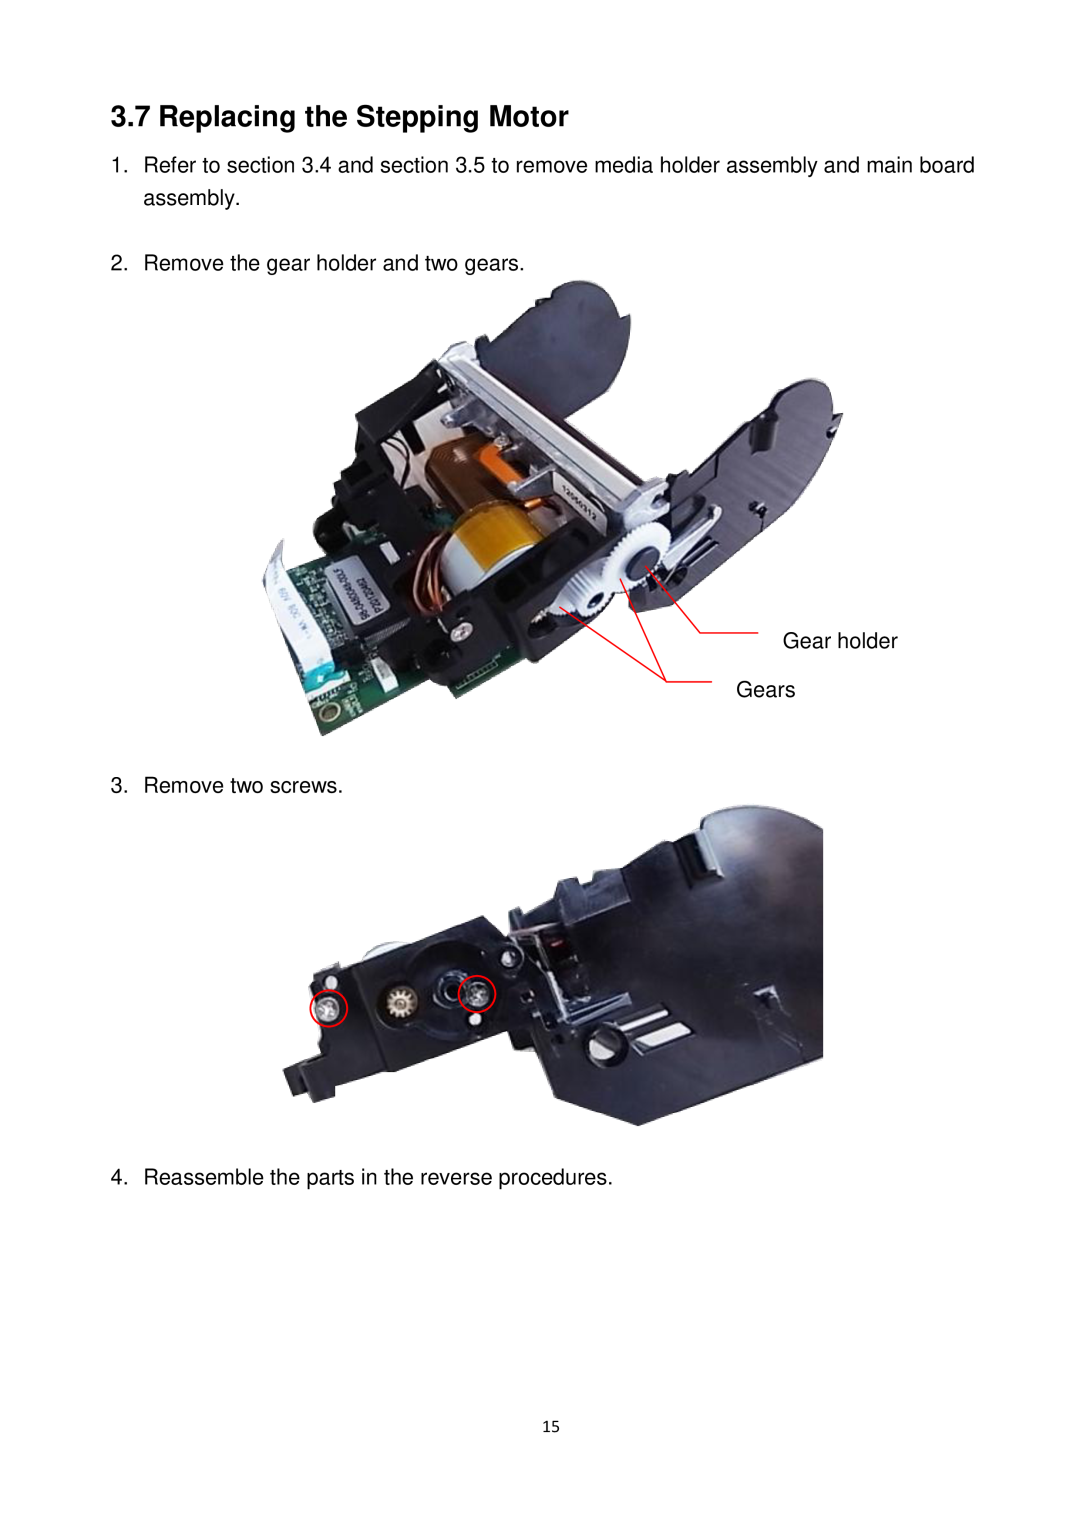 Alpha Vision Tech Alpha-3R service manual Replacing the Stepping Motor, Remove the gear holder and two gears 